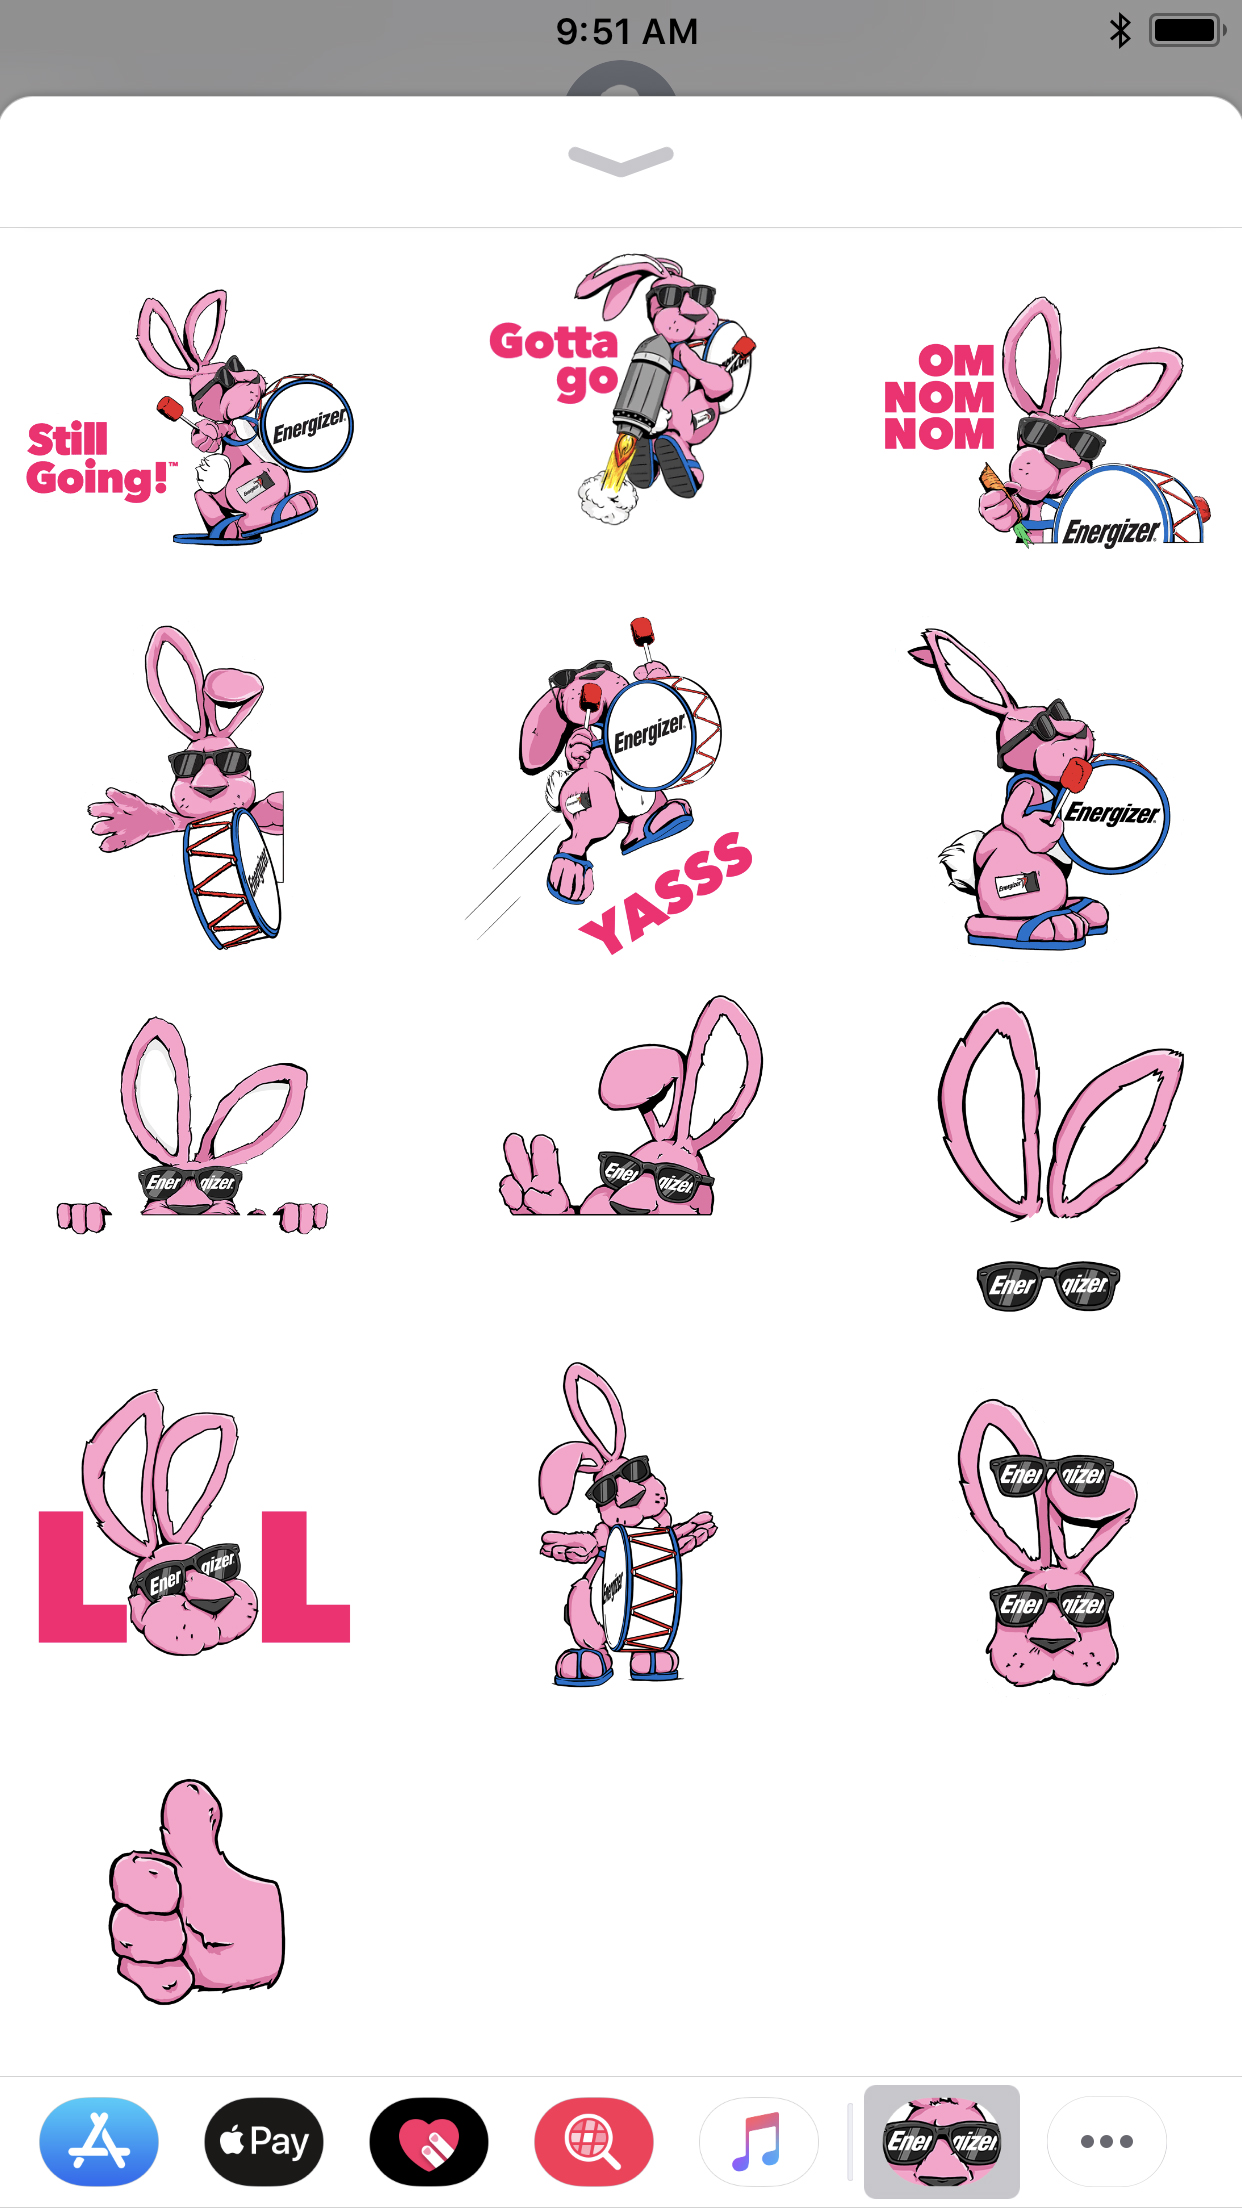 The free Energizer Bunny™ iMessage pack contains thirteen stickers - six animated and seven static - for a range of uses in iMessage conversations.